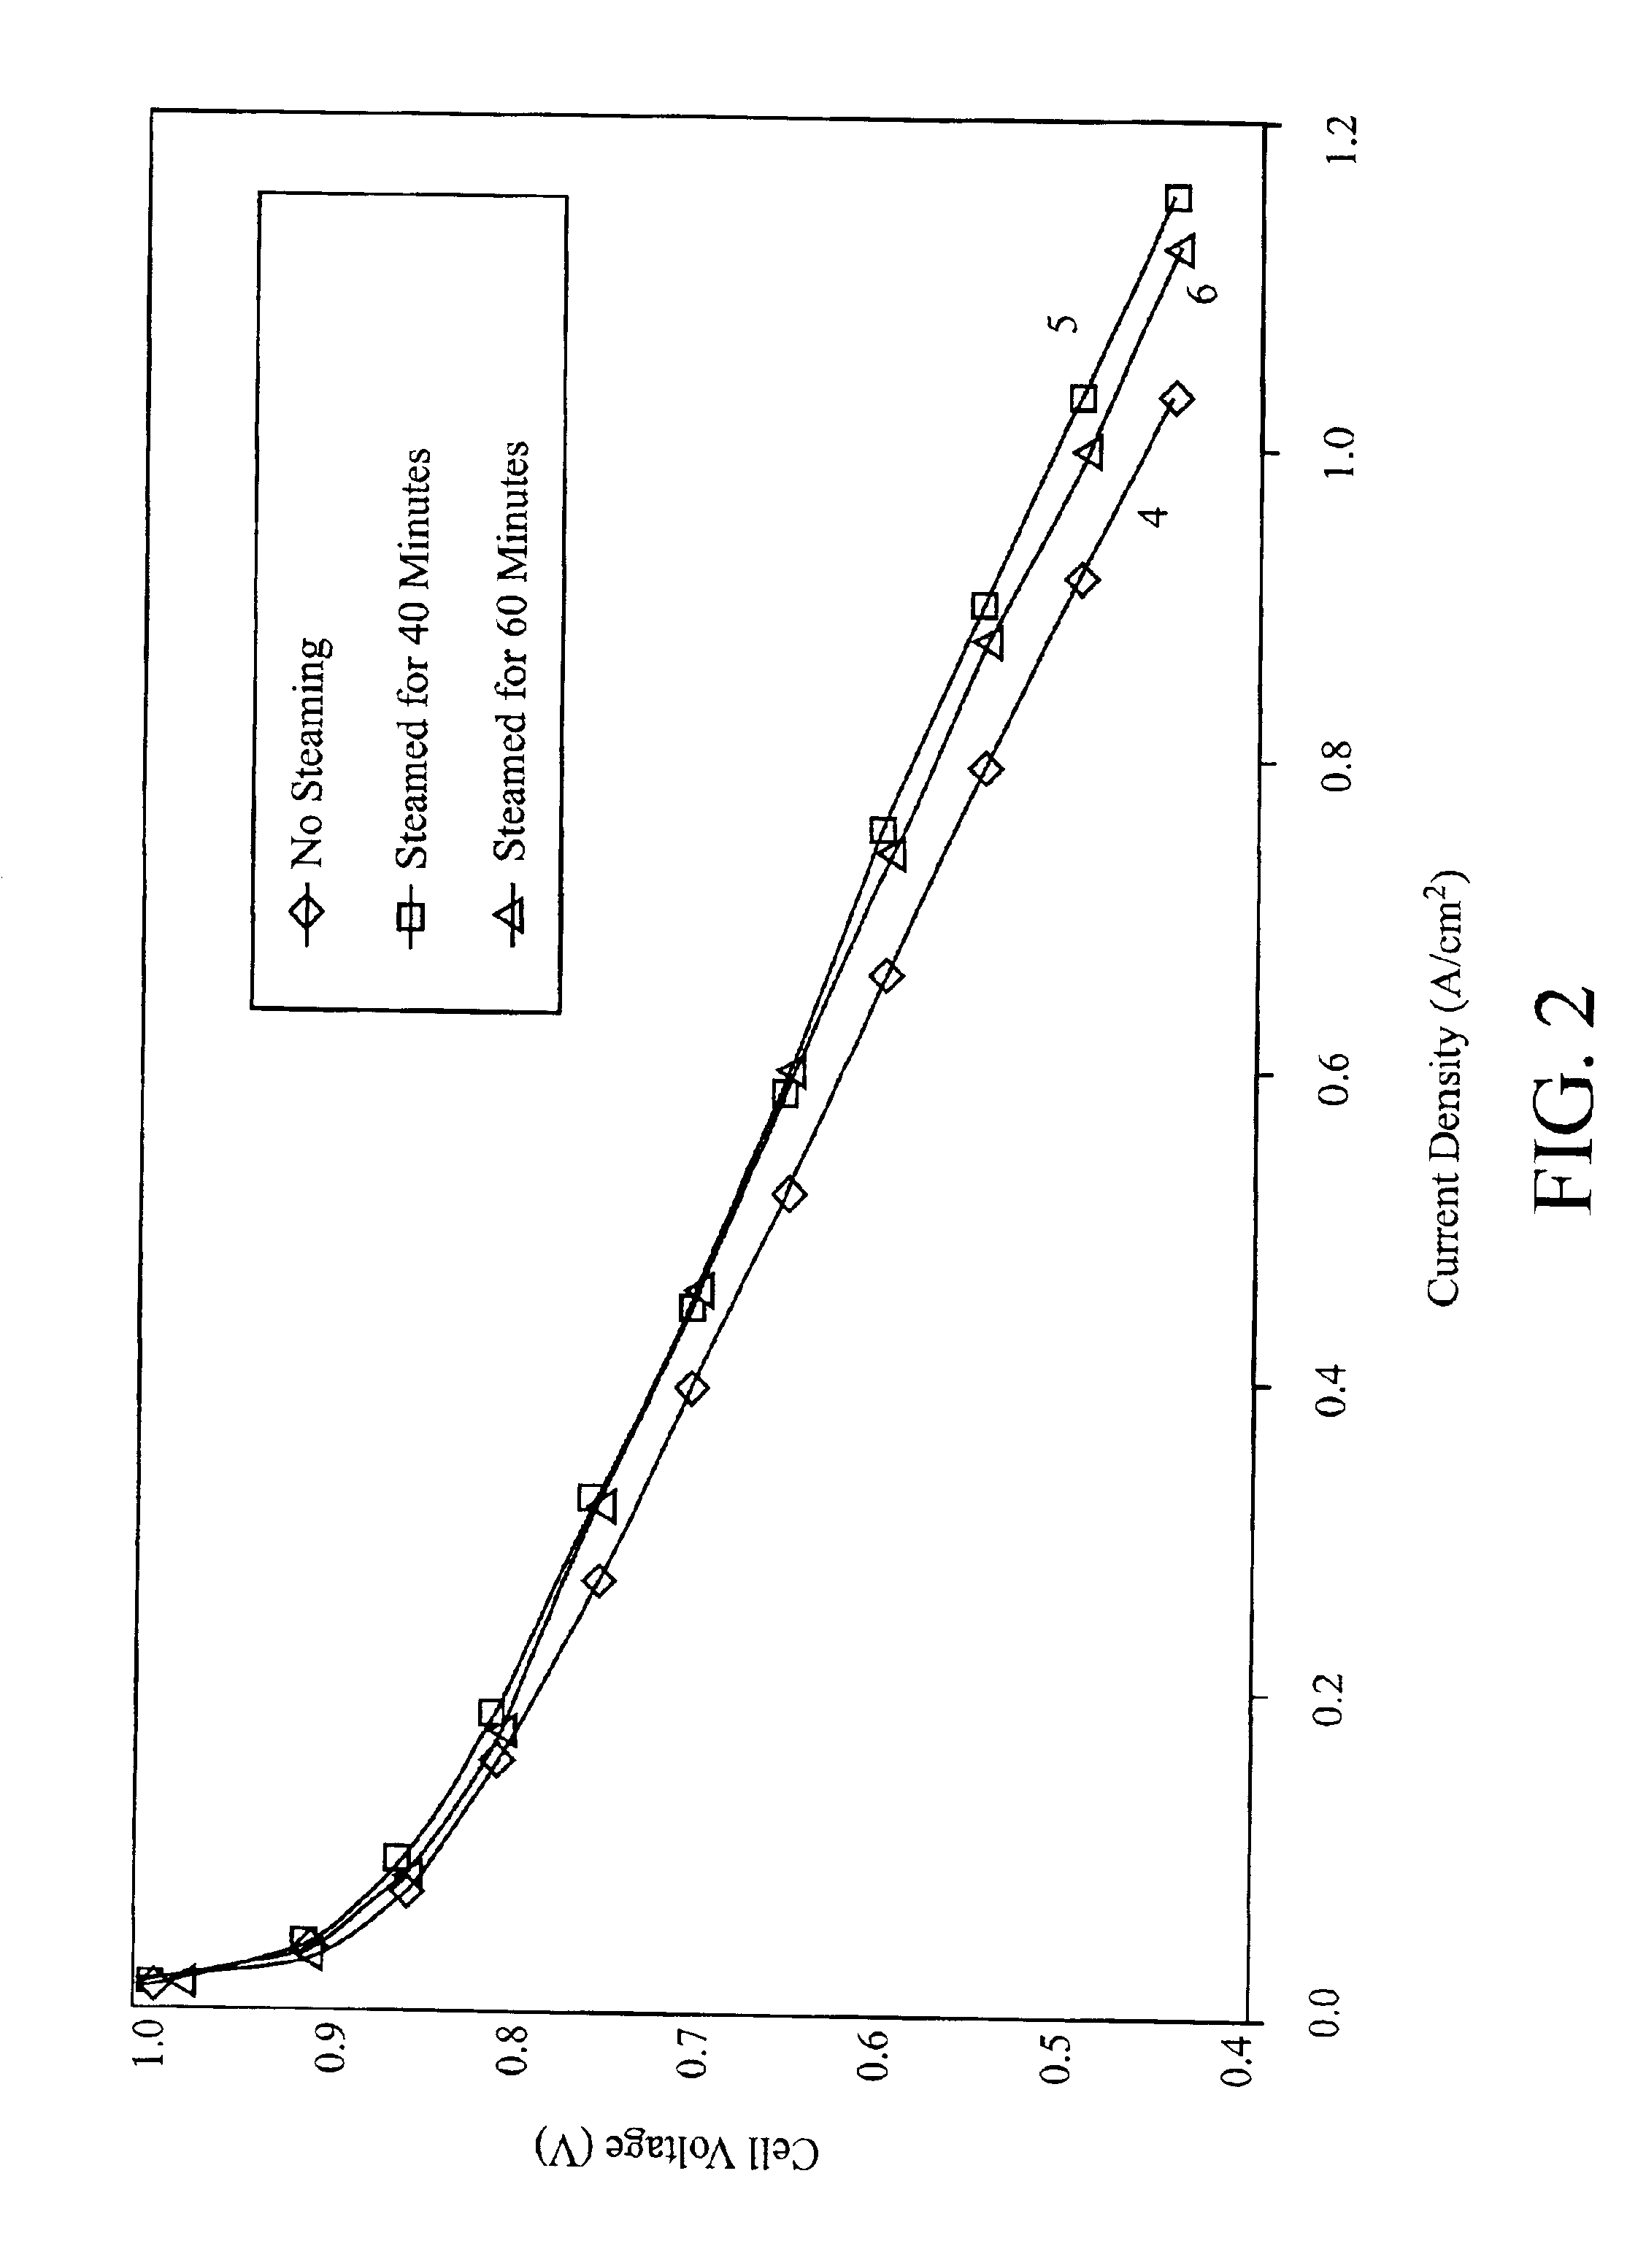 Enhancement of electrochemical cell performance